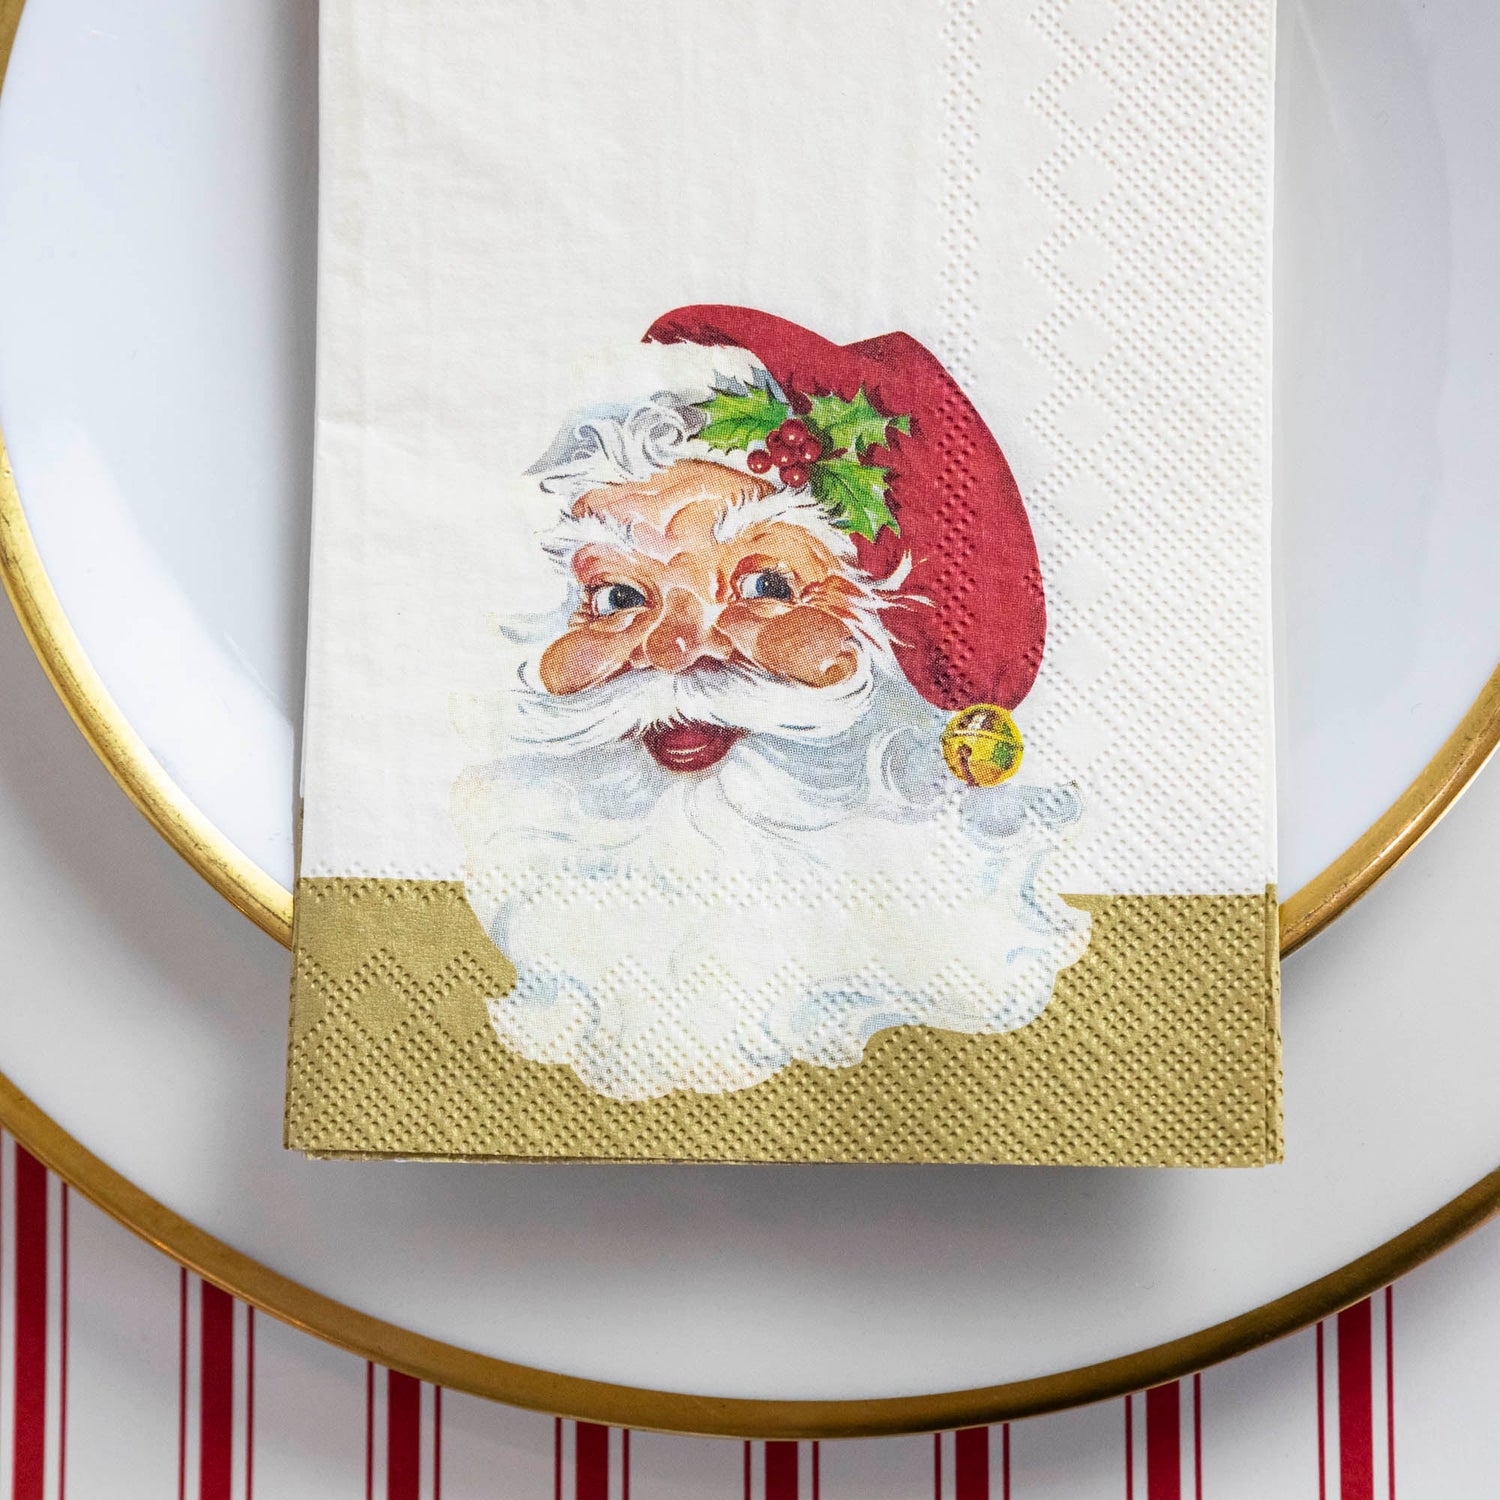 Close-up of a Santa Guest Napkin centered on a plate in a Christmas place setting.